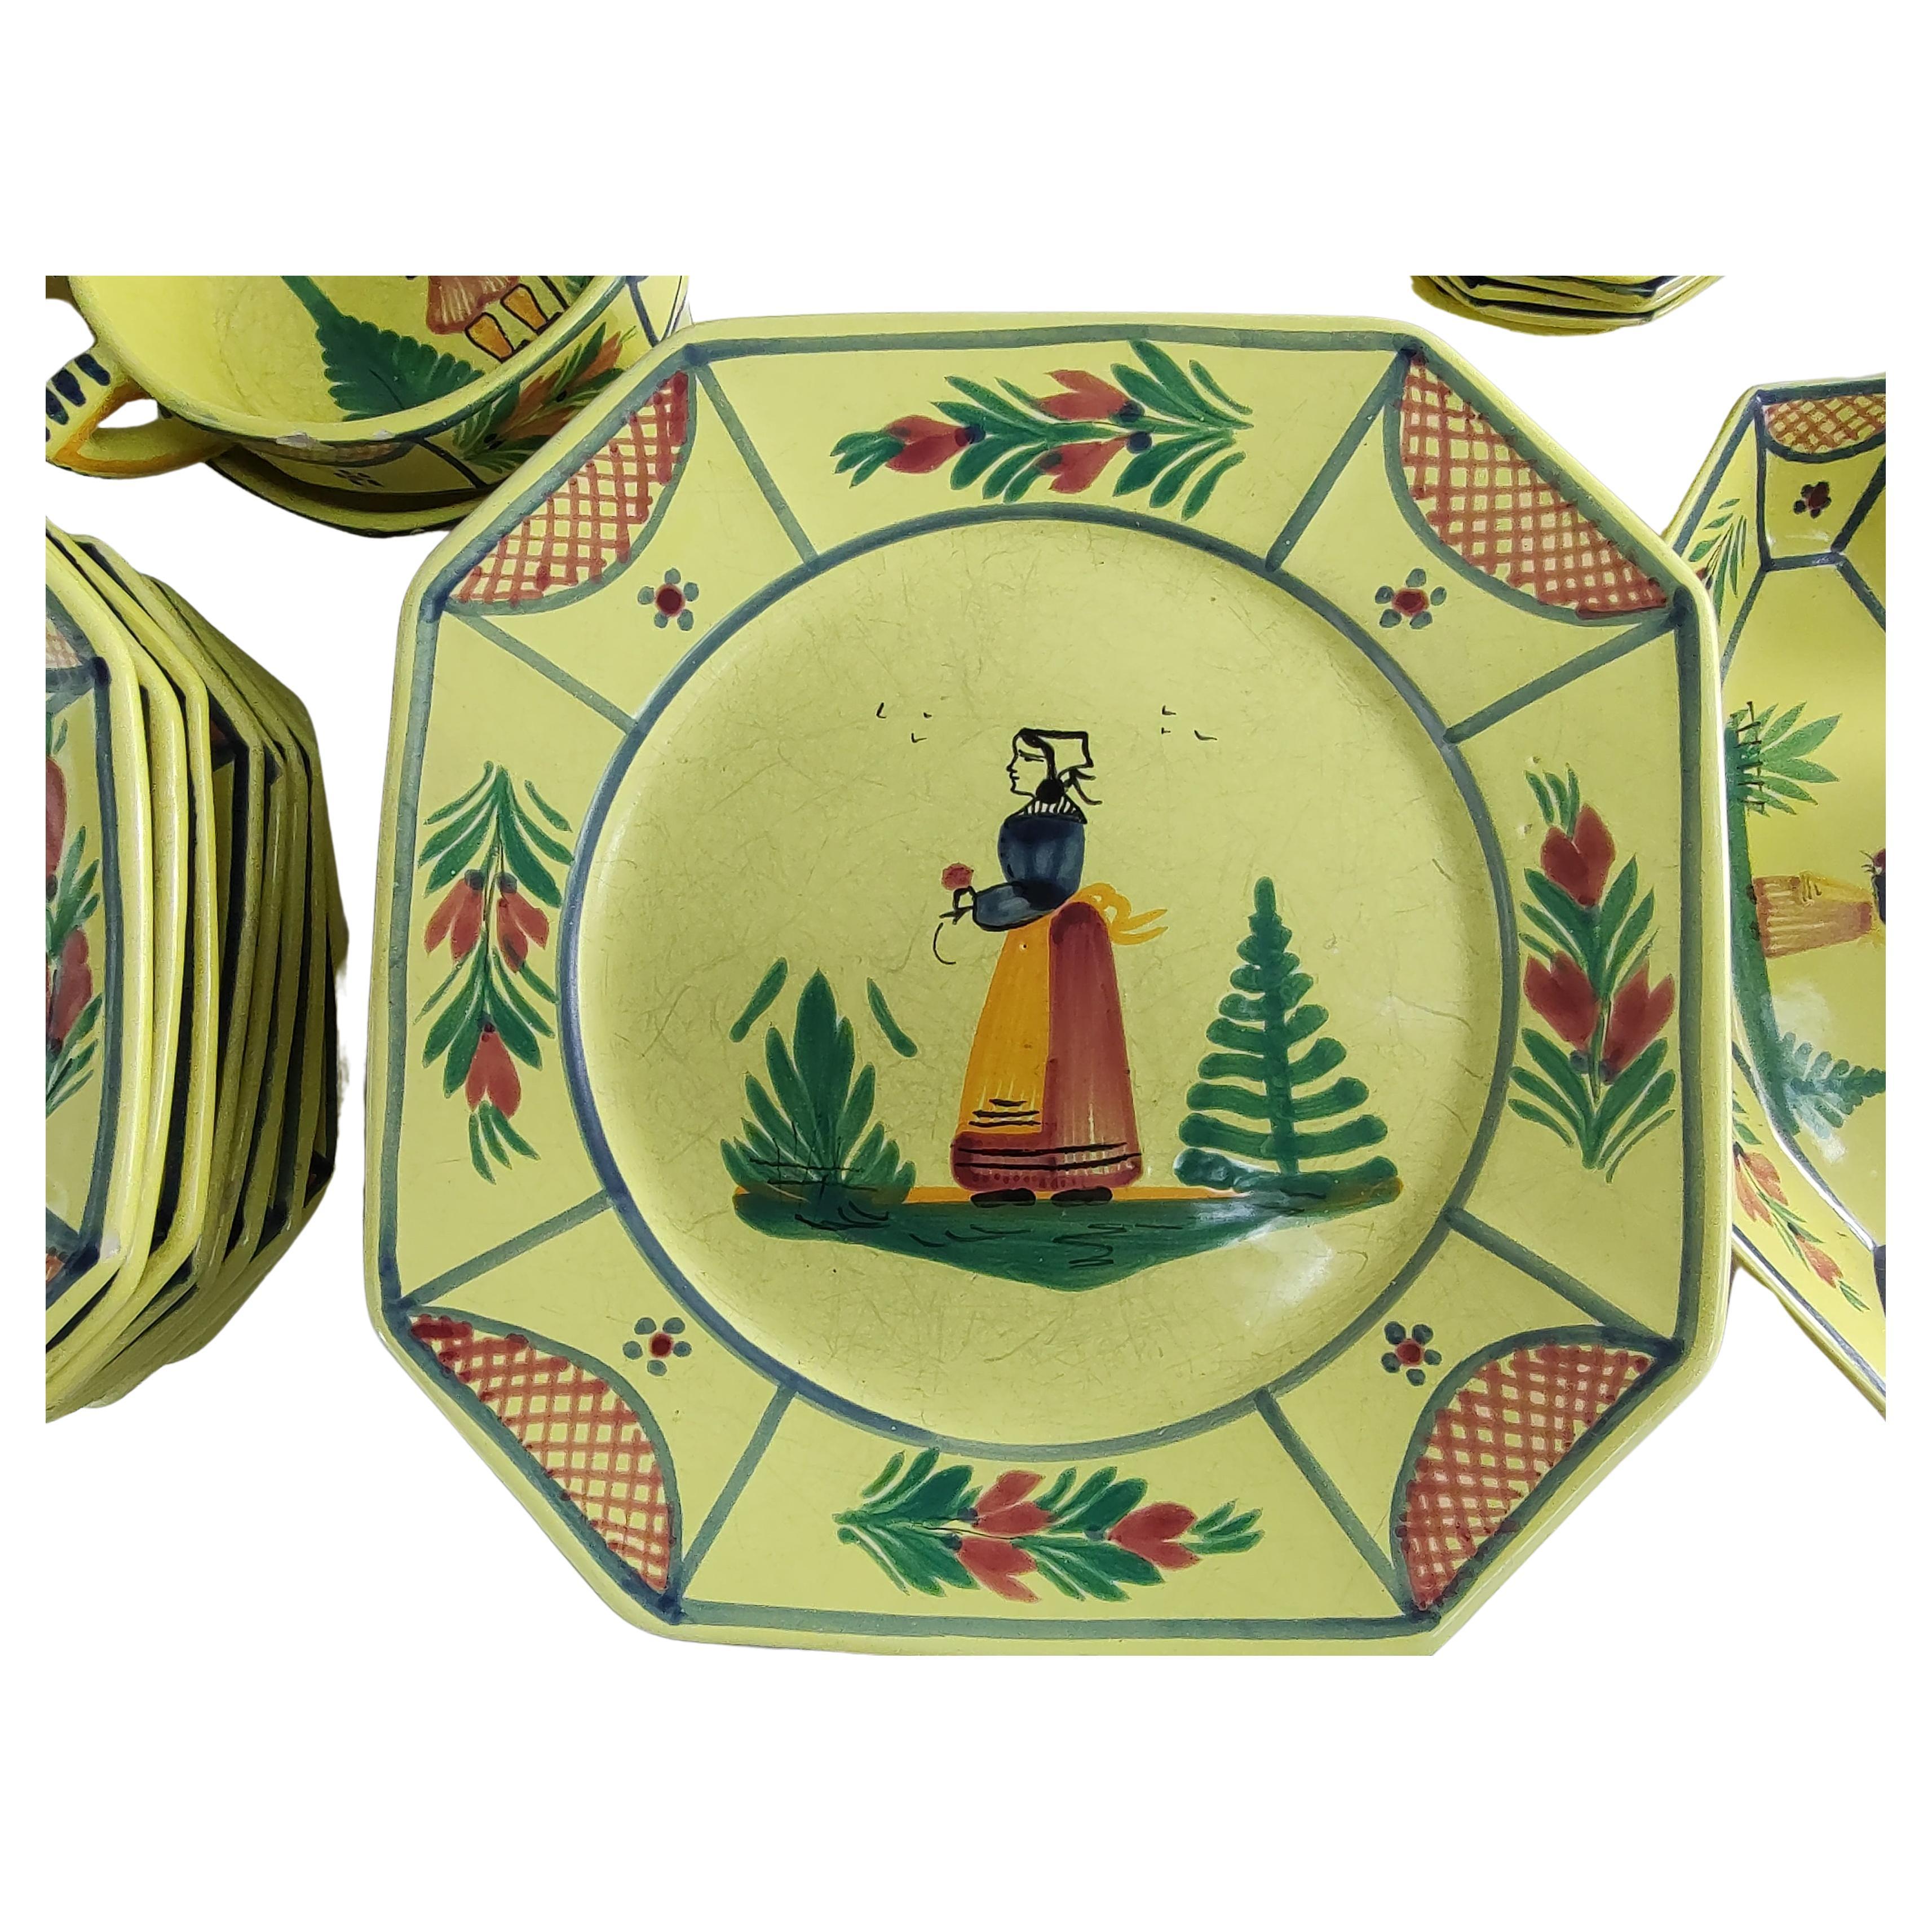 Fabulous dinner set of 50 pieces by the Henriot Quimper co. Their beautiful yellow color with the traditional peasant man ,& woman. Handmade & hand painted set is a classic. Set consists of 7 10